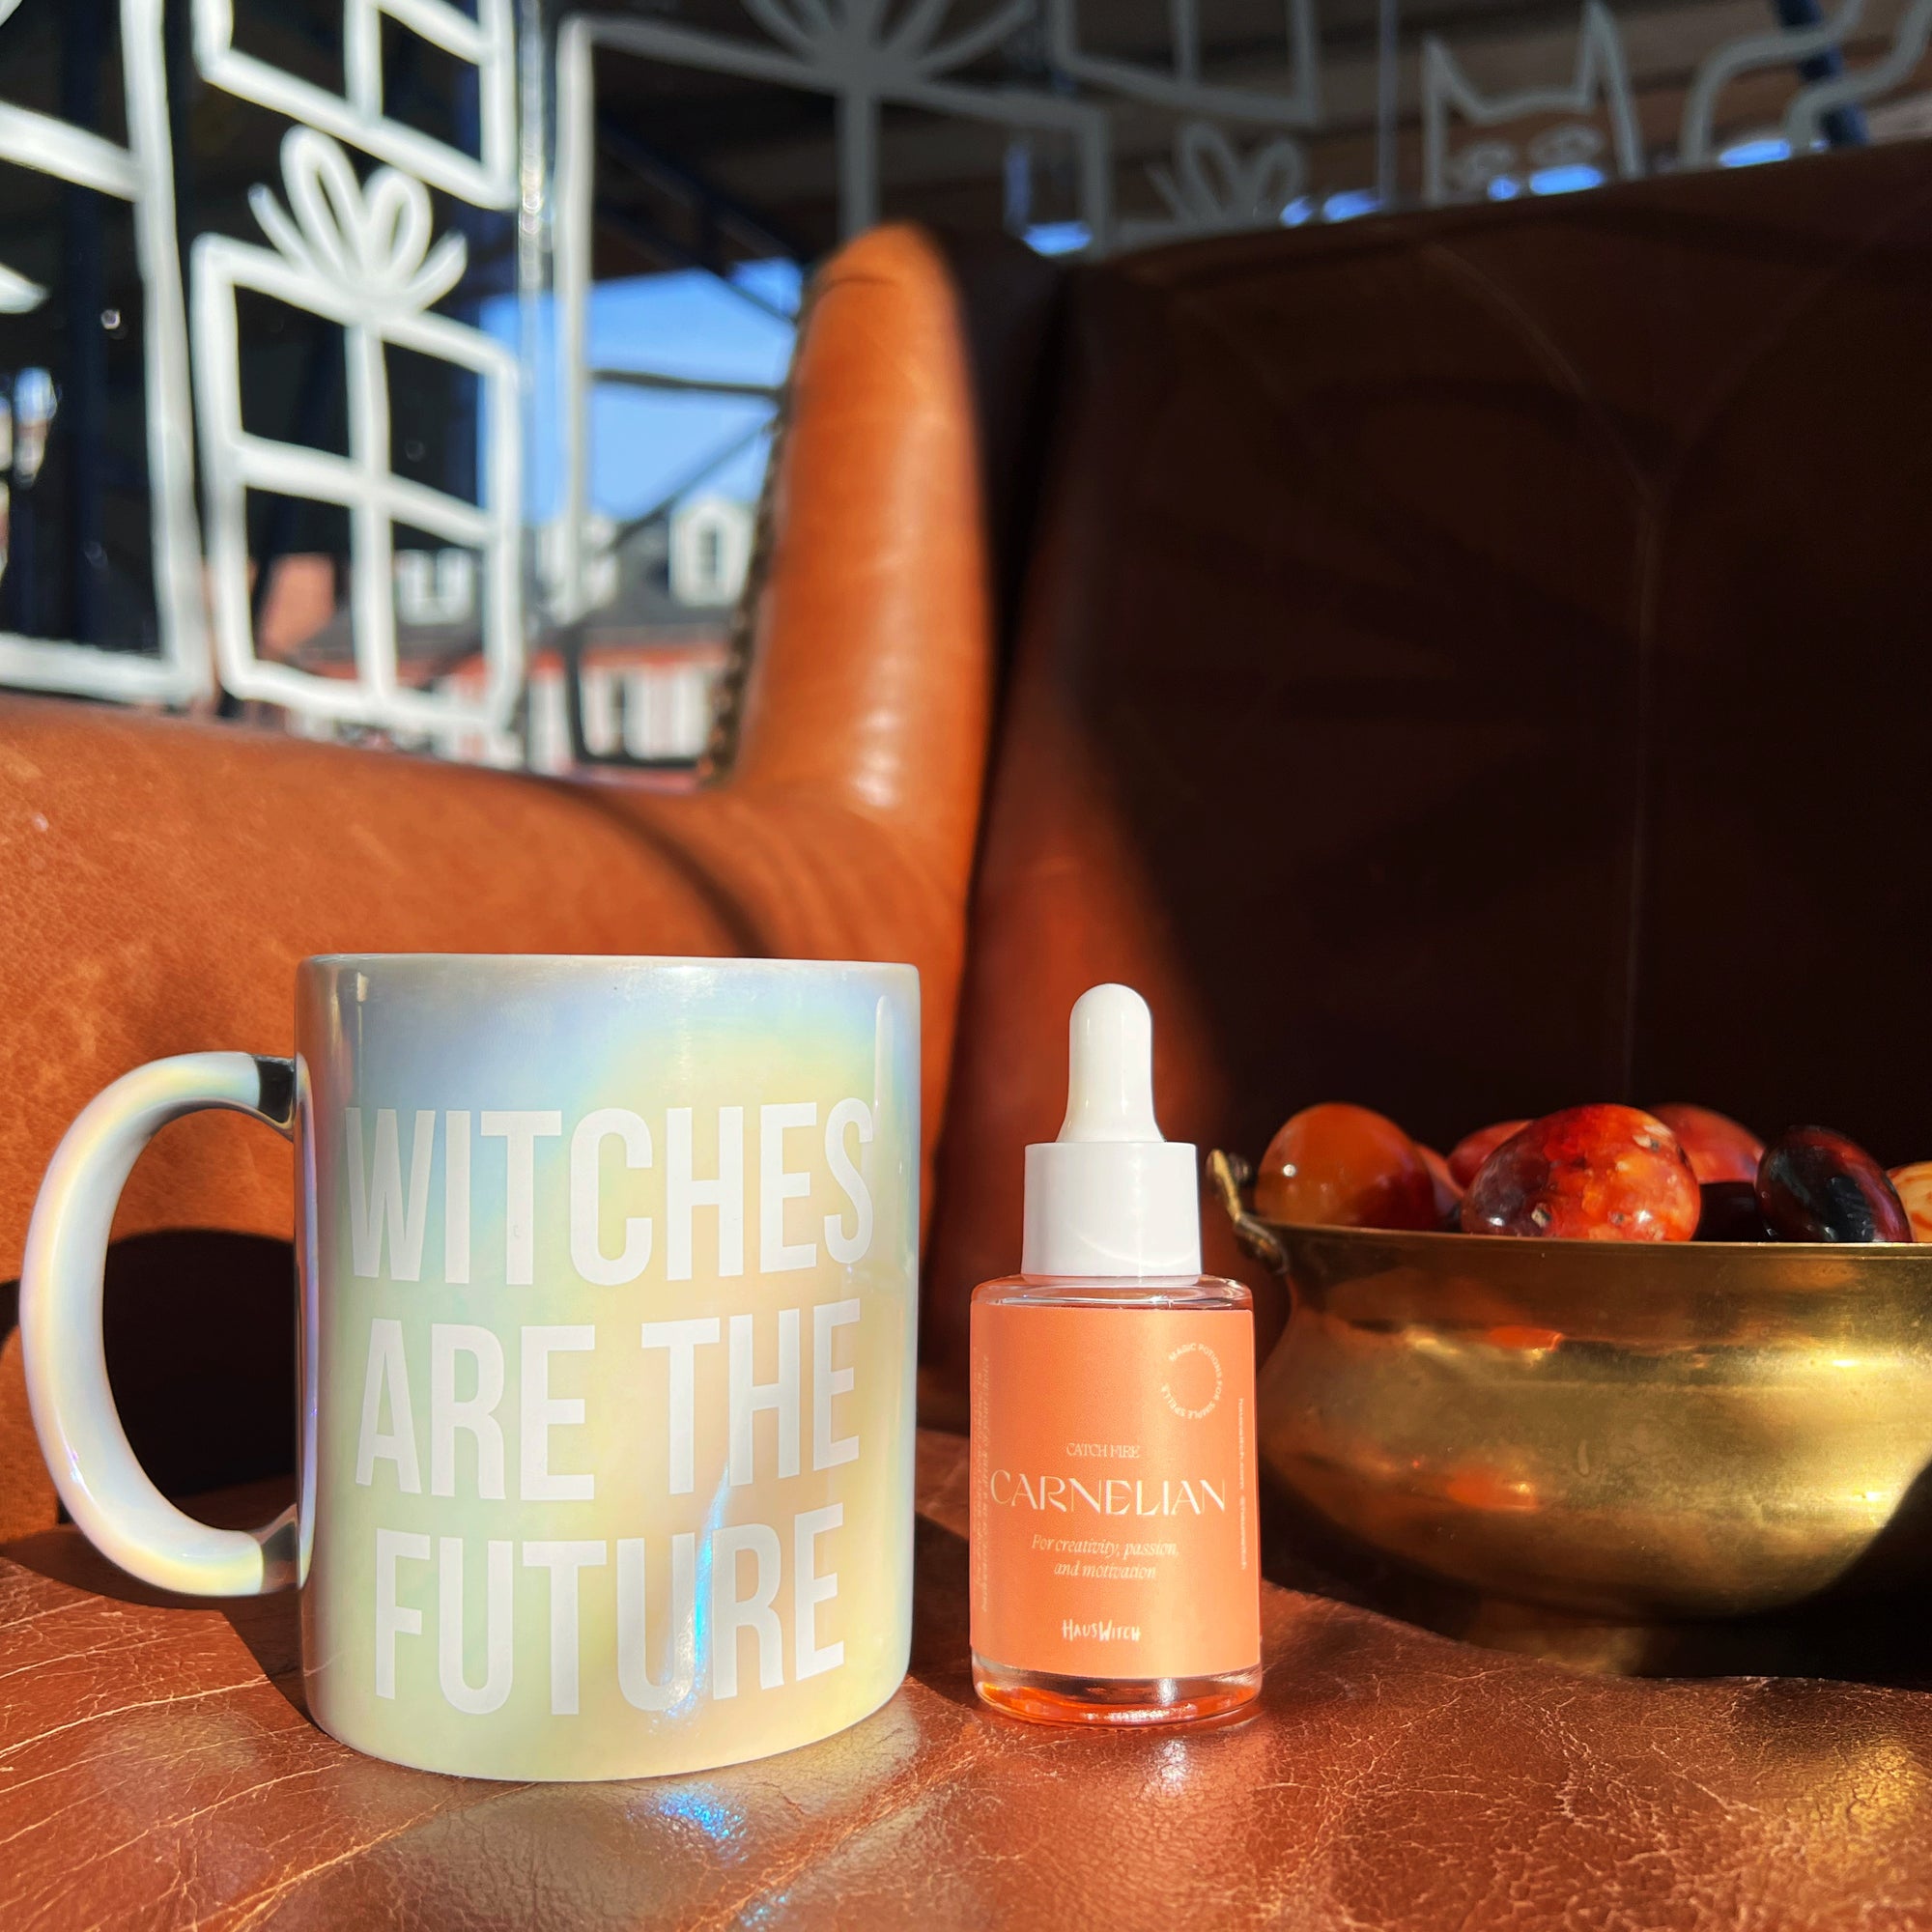 Hot Chocolate for Even Hotter Witches